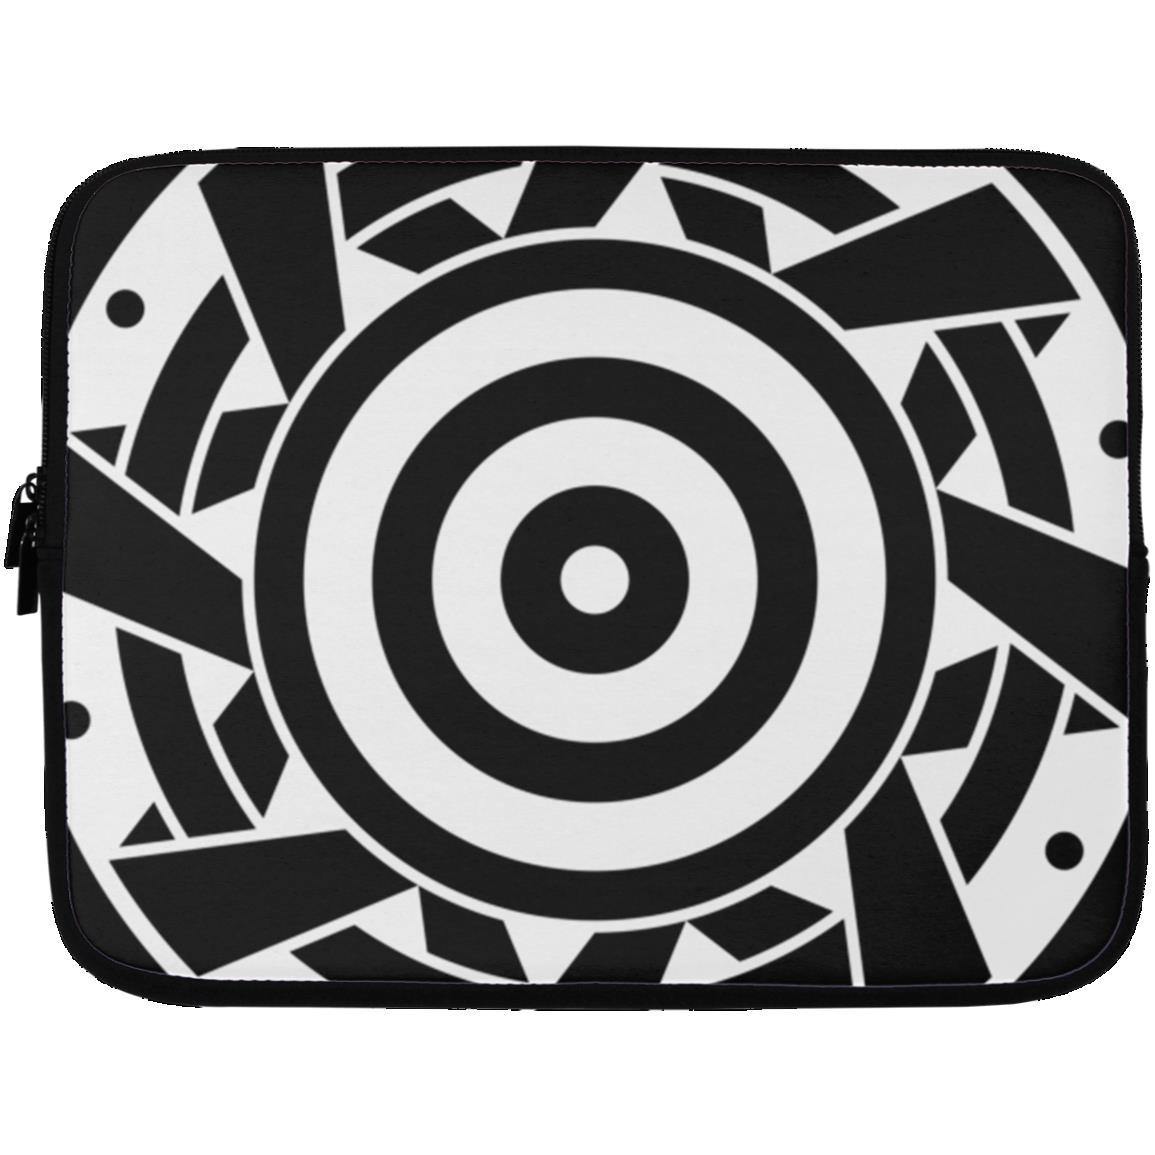 Crop Circle Laptop Sleeve - Ammersee - Shapes of Wisdom